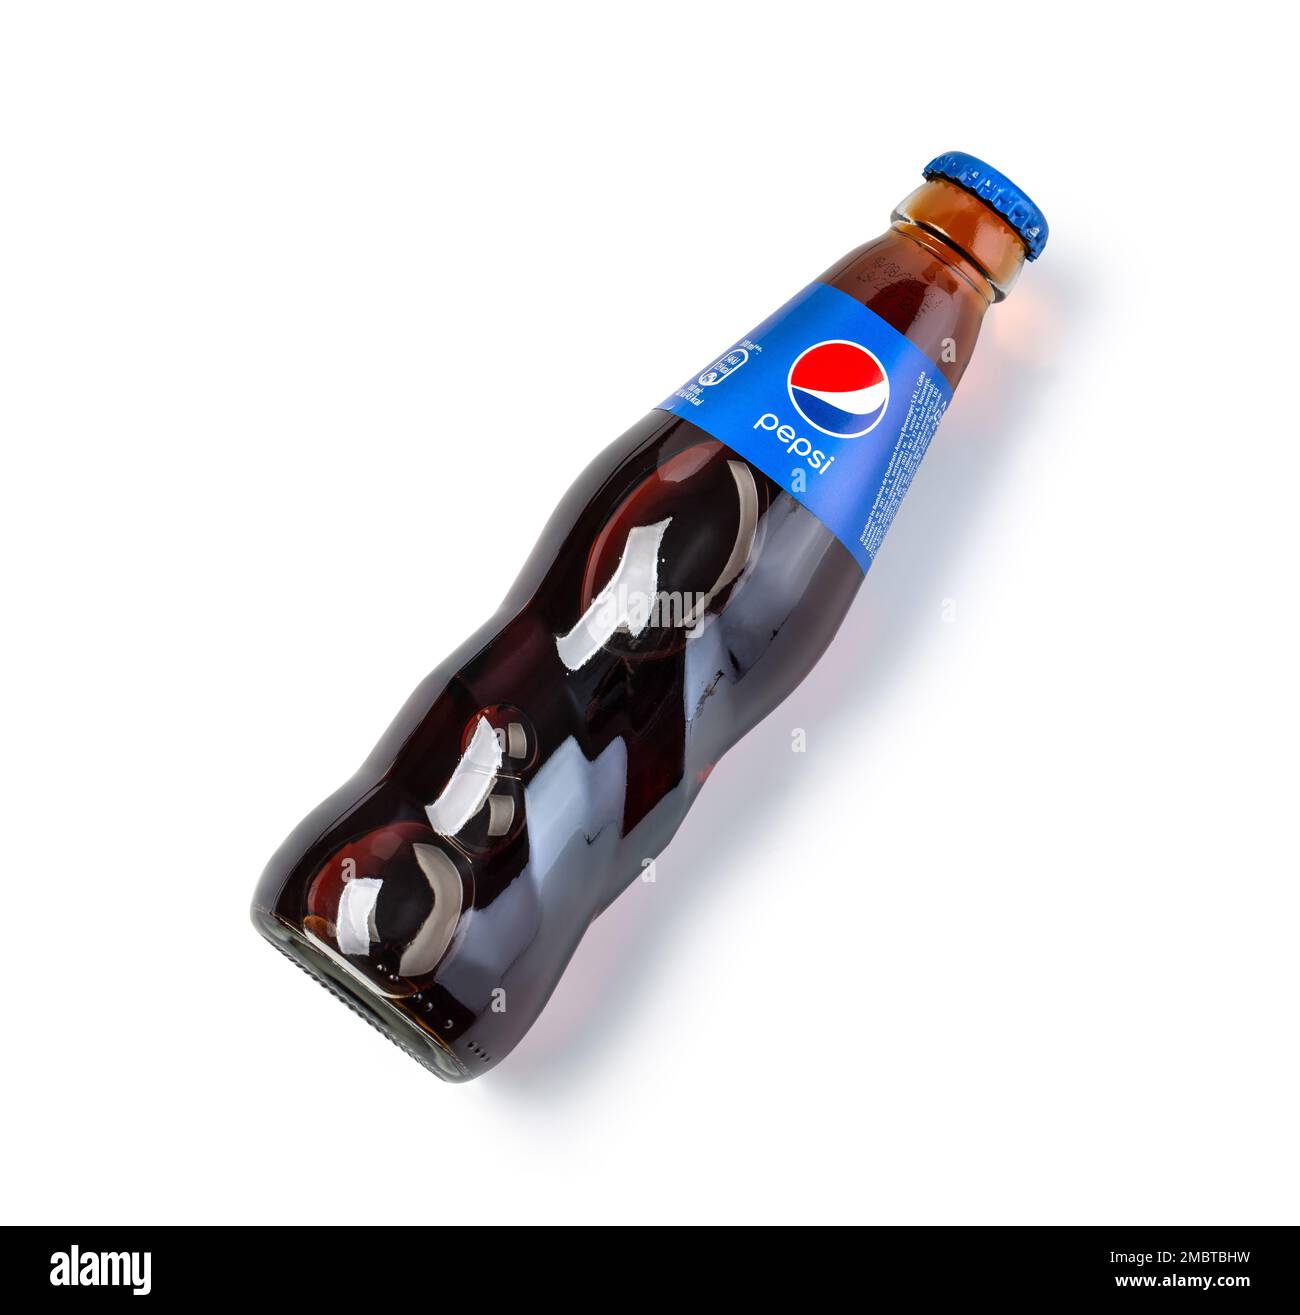 Chisinau, Moldova - April 26, 2020: Photo of Pepsi glass bottle. Pepsi is a carbonated soft drink that is produced and manufactured by PepsiCo Stock Photo